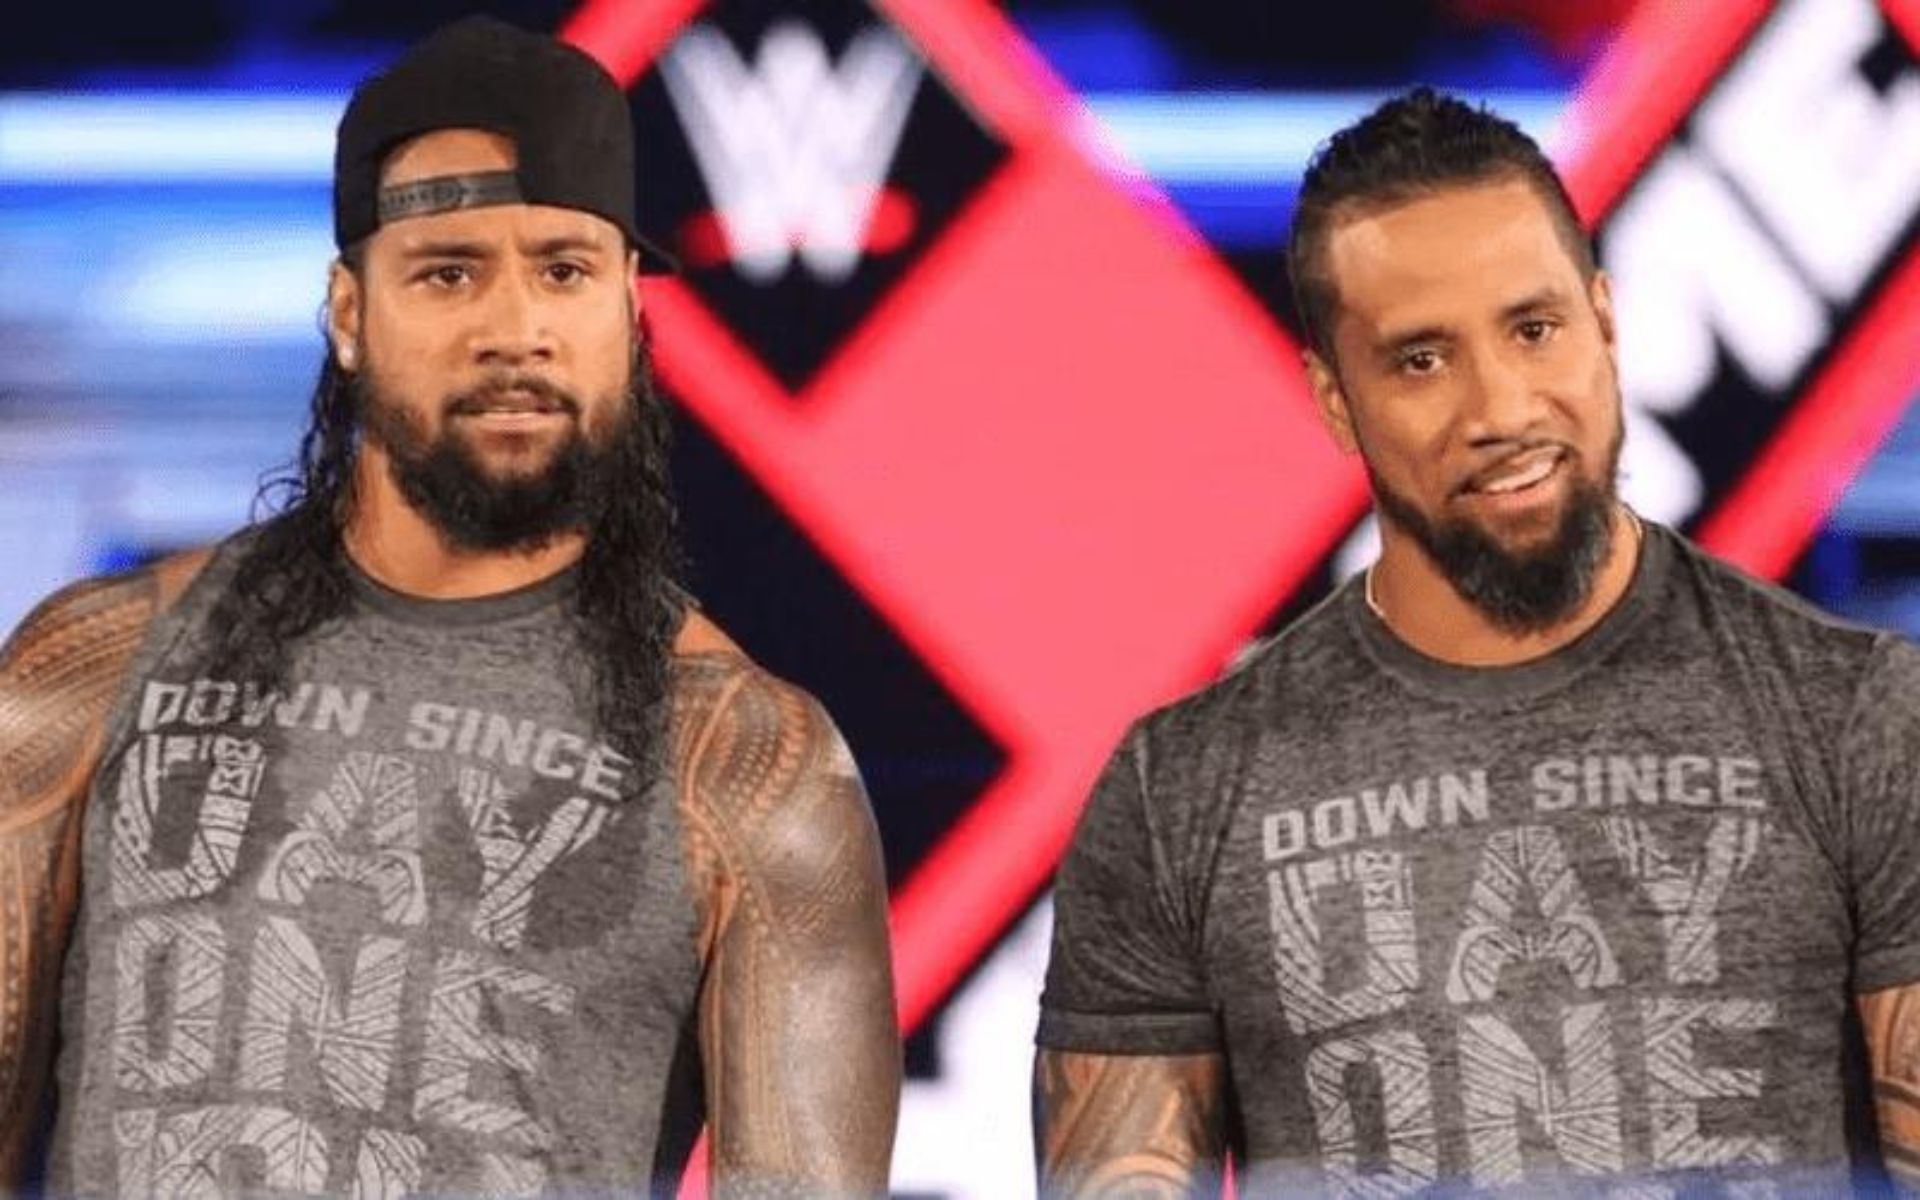 WWE Undisputed Tag Team Champions, The Usos